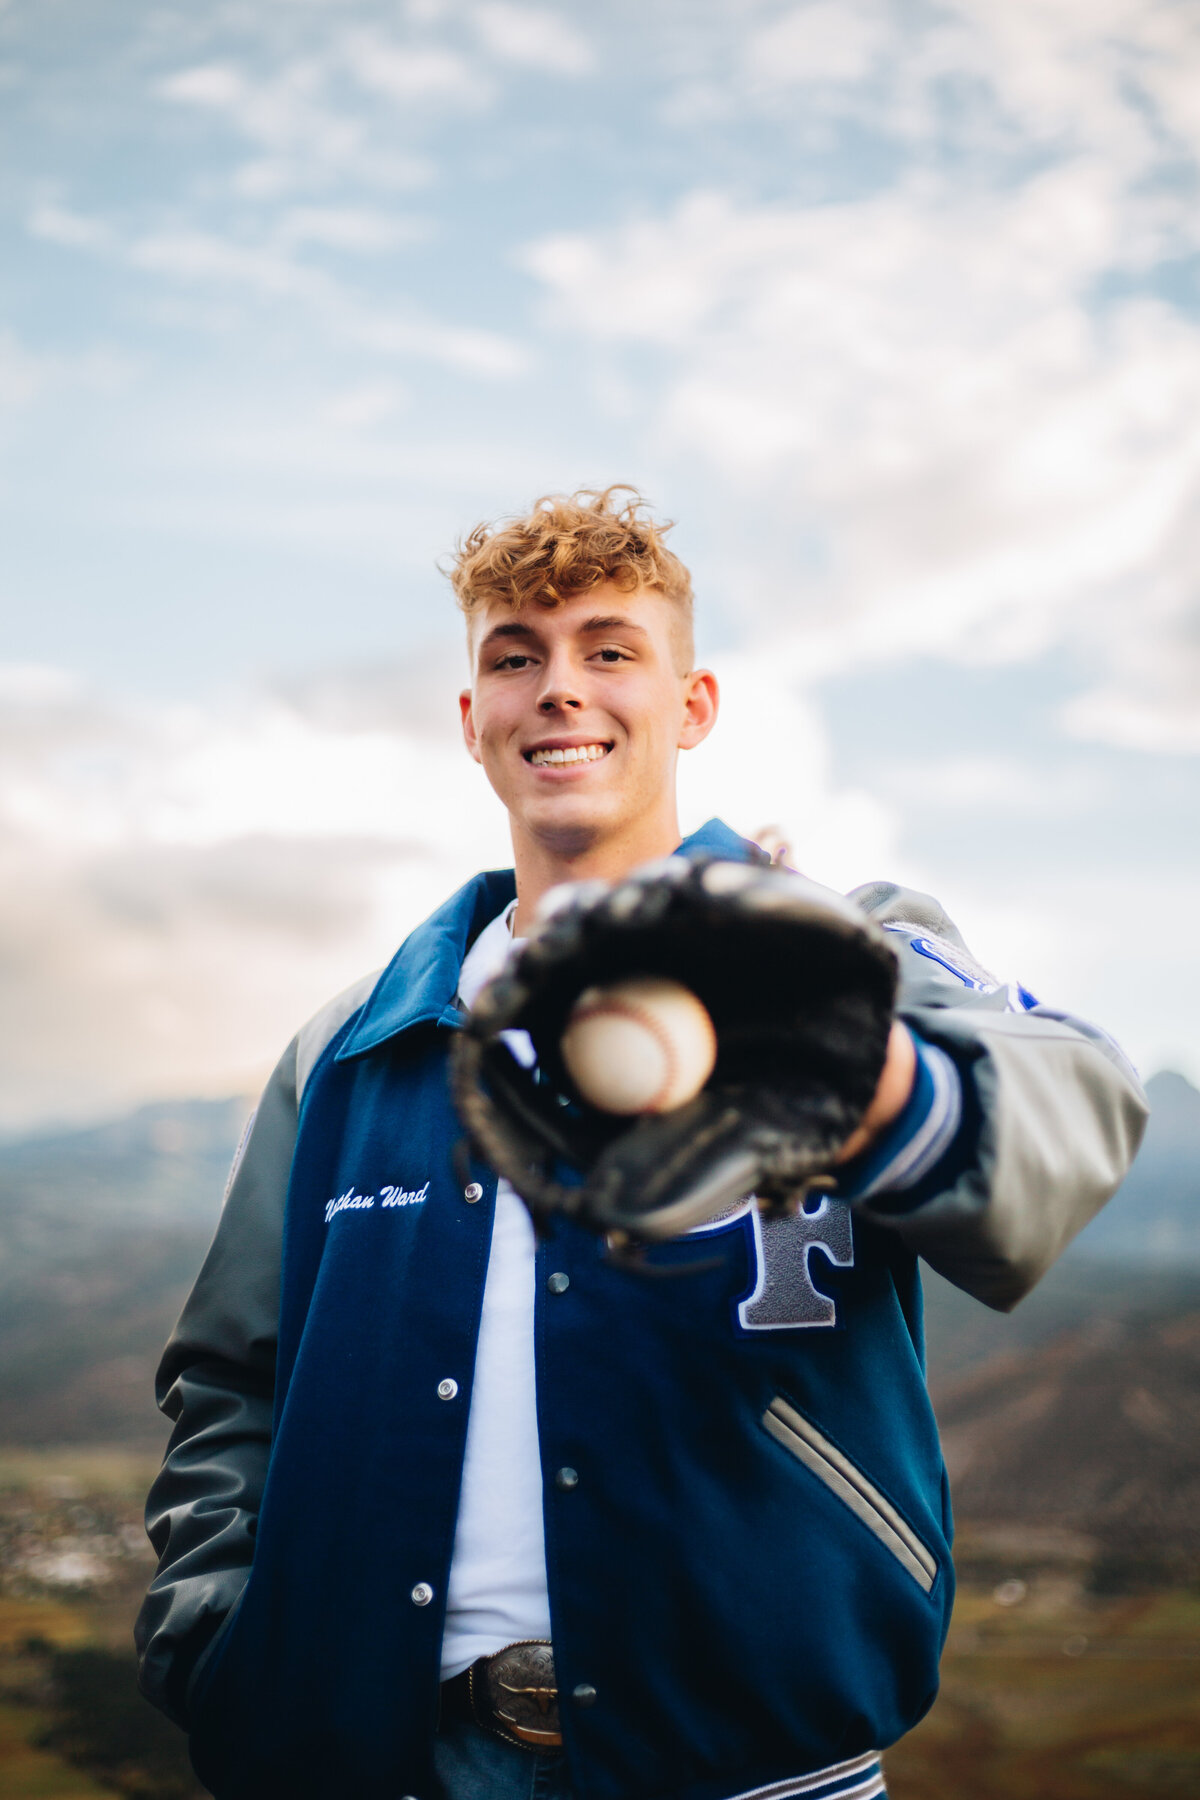 Kyle poses with his baseball for his Montrose senior pictures.